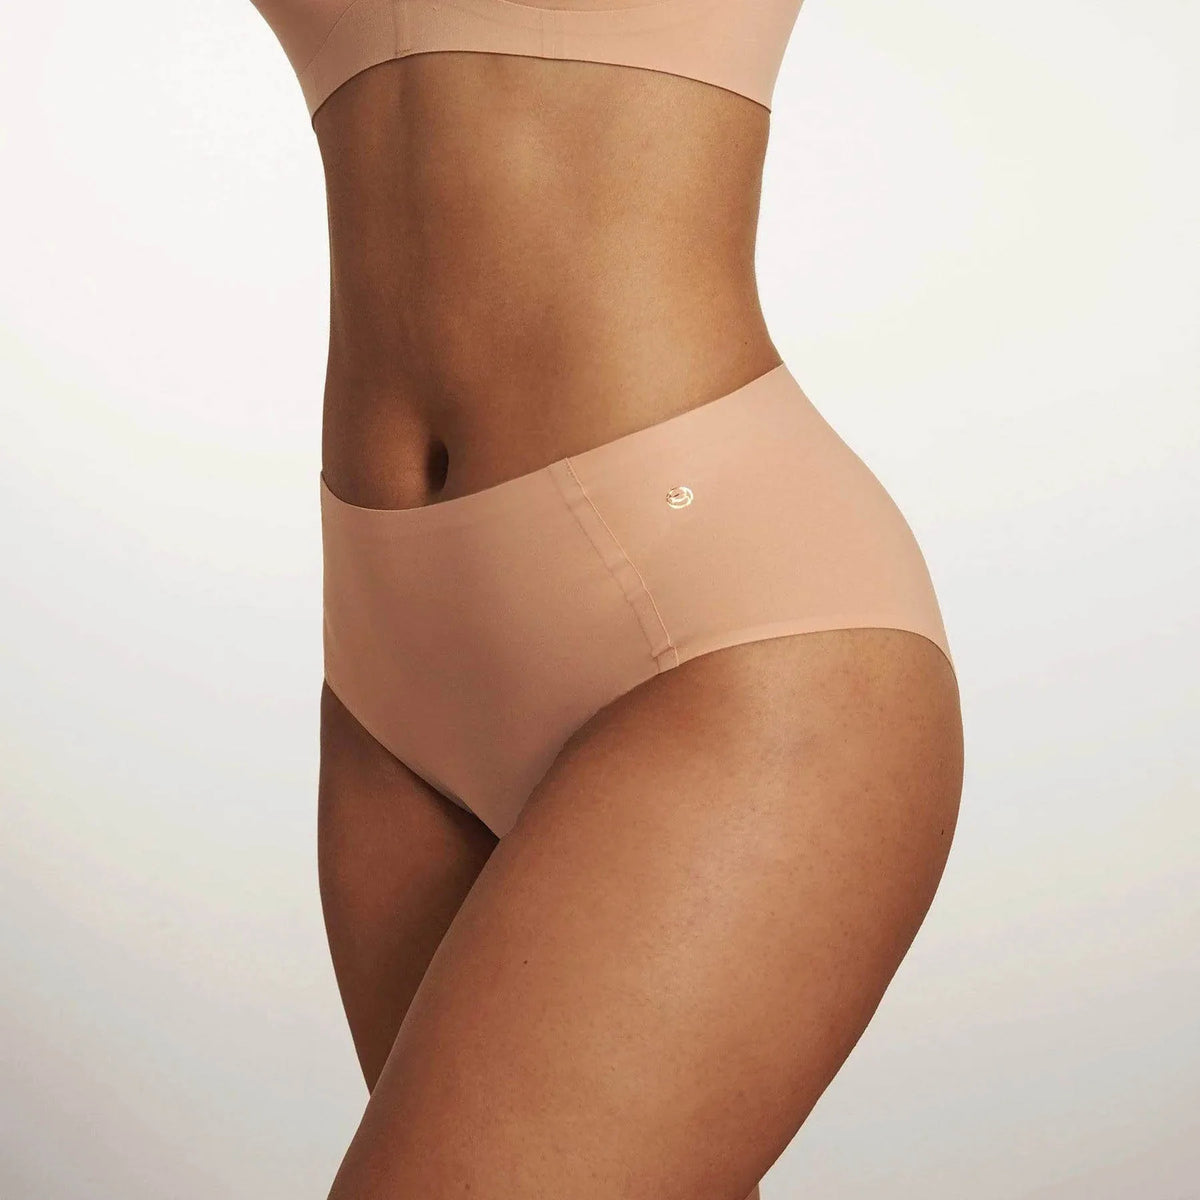 Retro High-Waisted Seamless Bikini Brief at Belle Lacet Lingerie